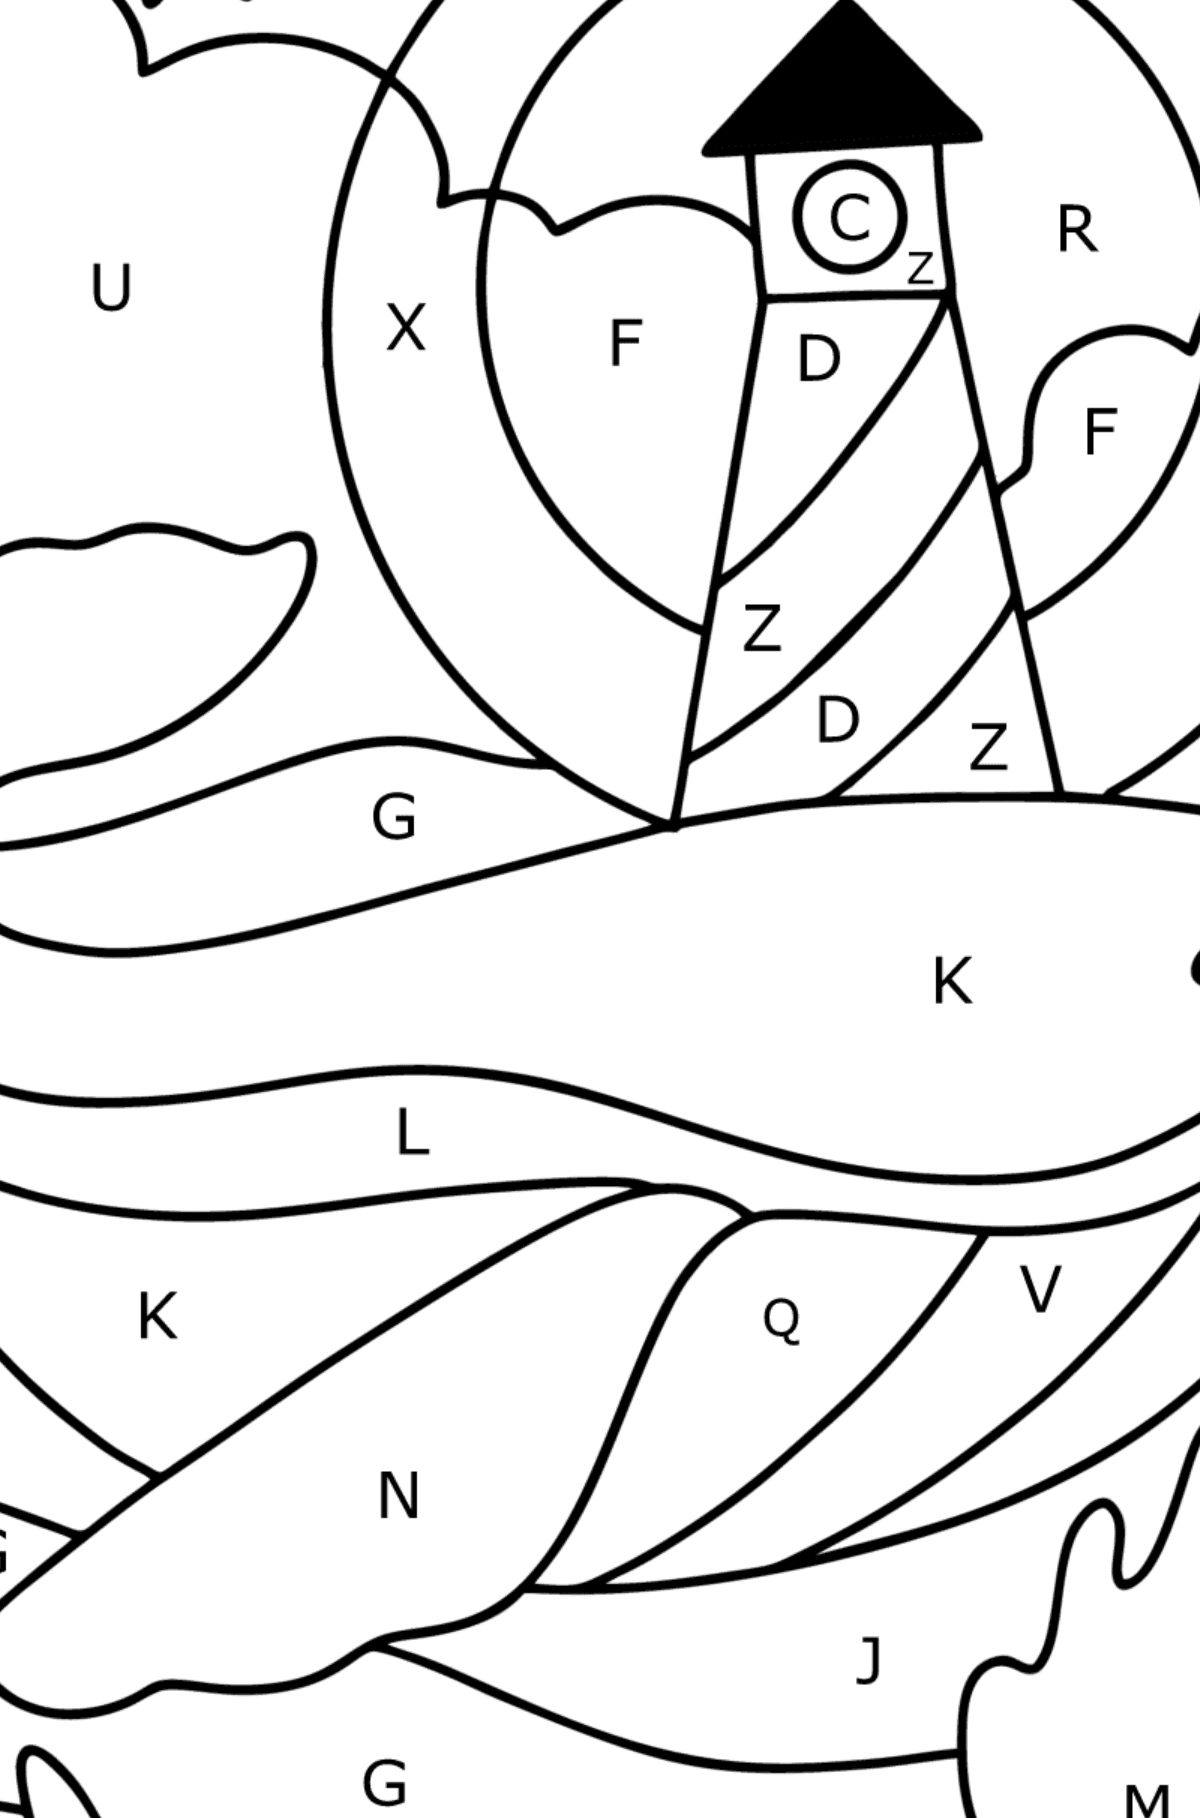 Whale with lighthouse coloring page - Coloring by Letters for Kids